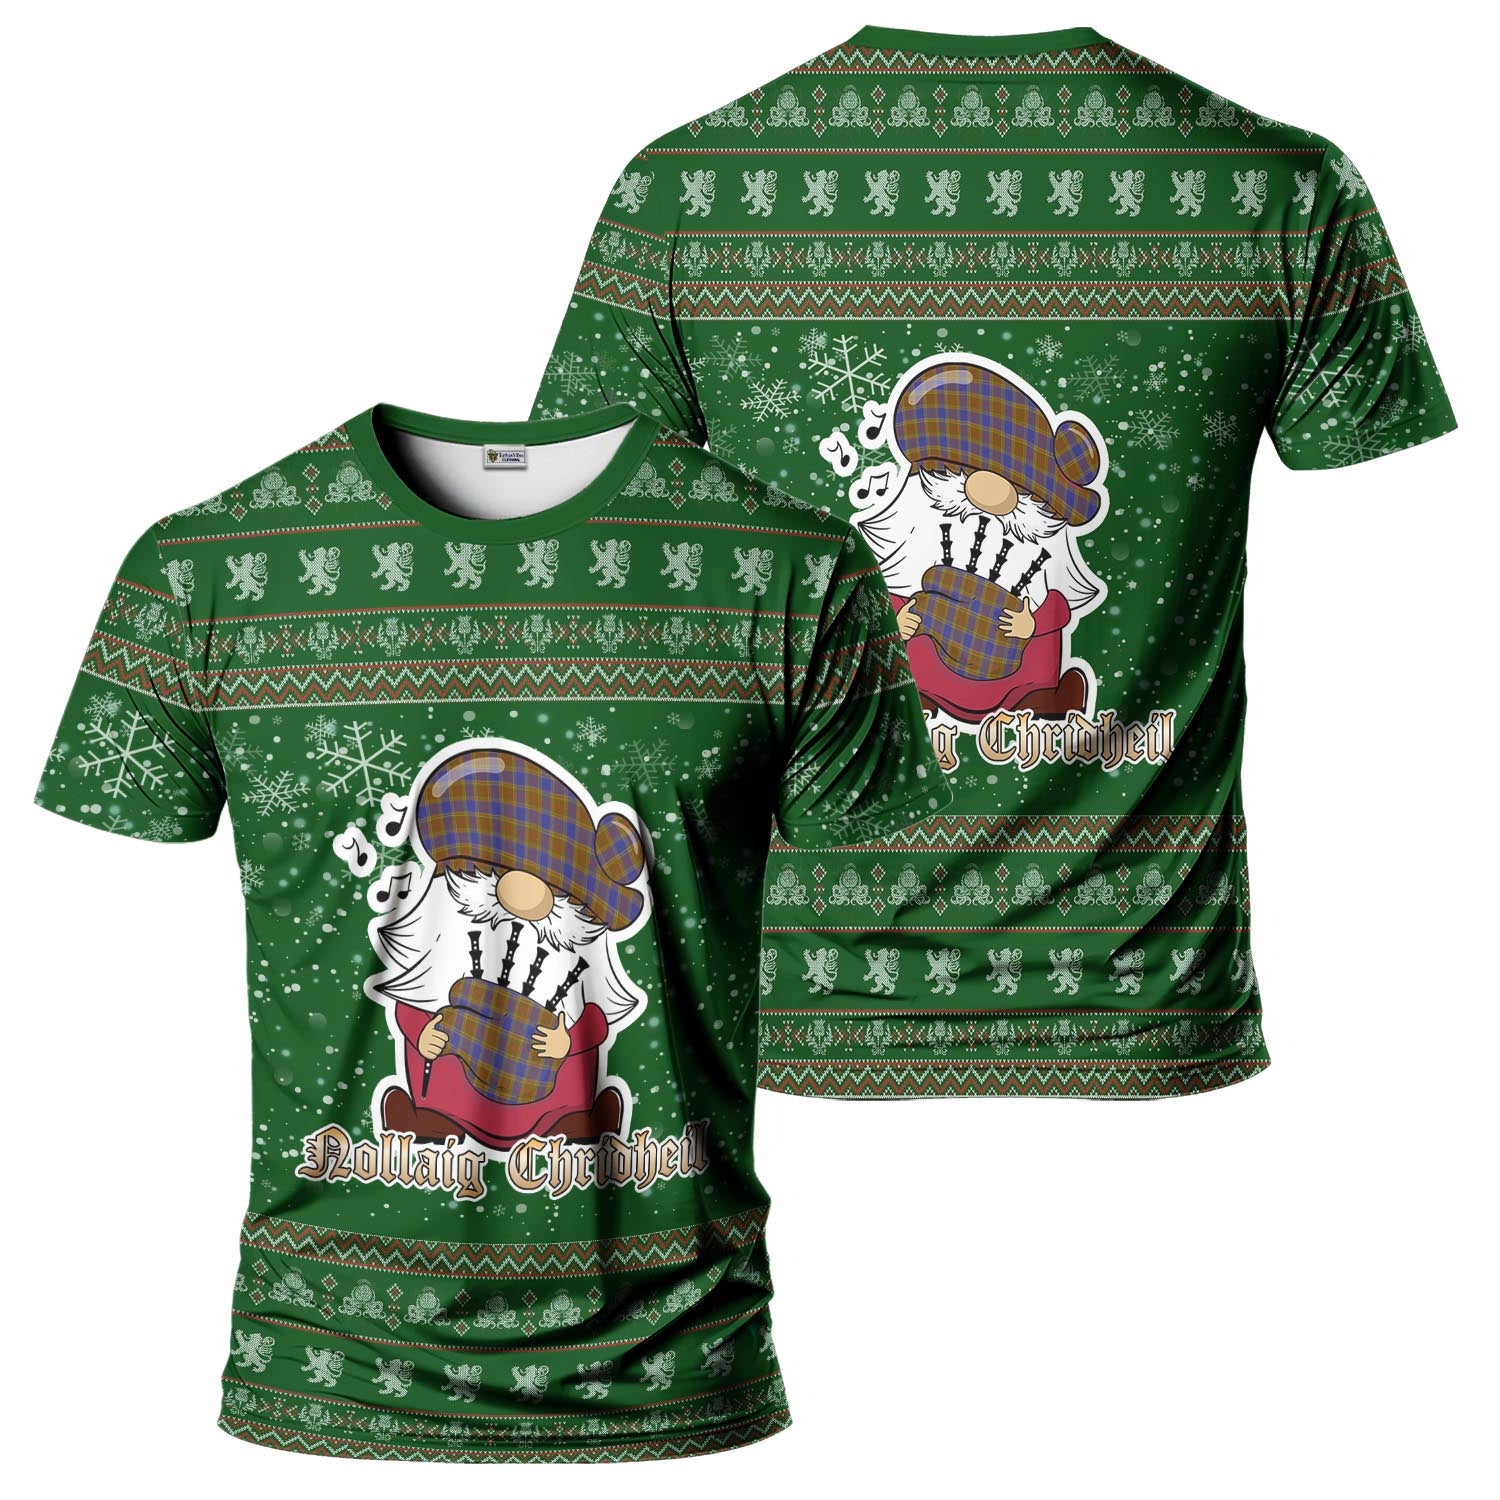 Balfour Modern Clan Christmas Family T-Shirt with Funny Gnome Playing Bagpipes Men's Shirt Green - Tartanvibesclothing